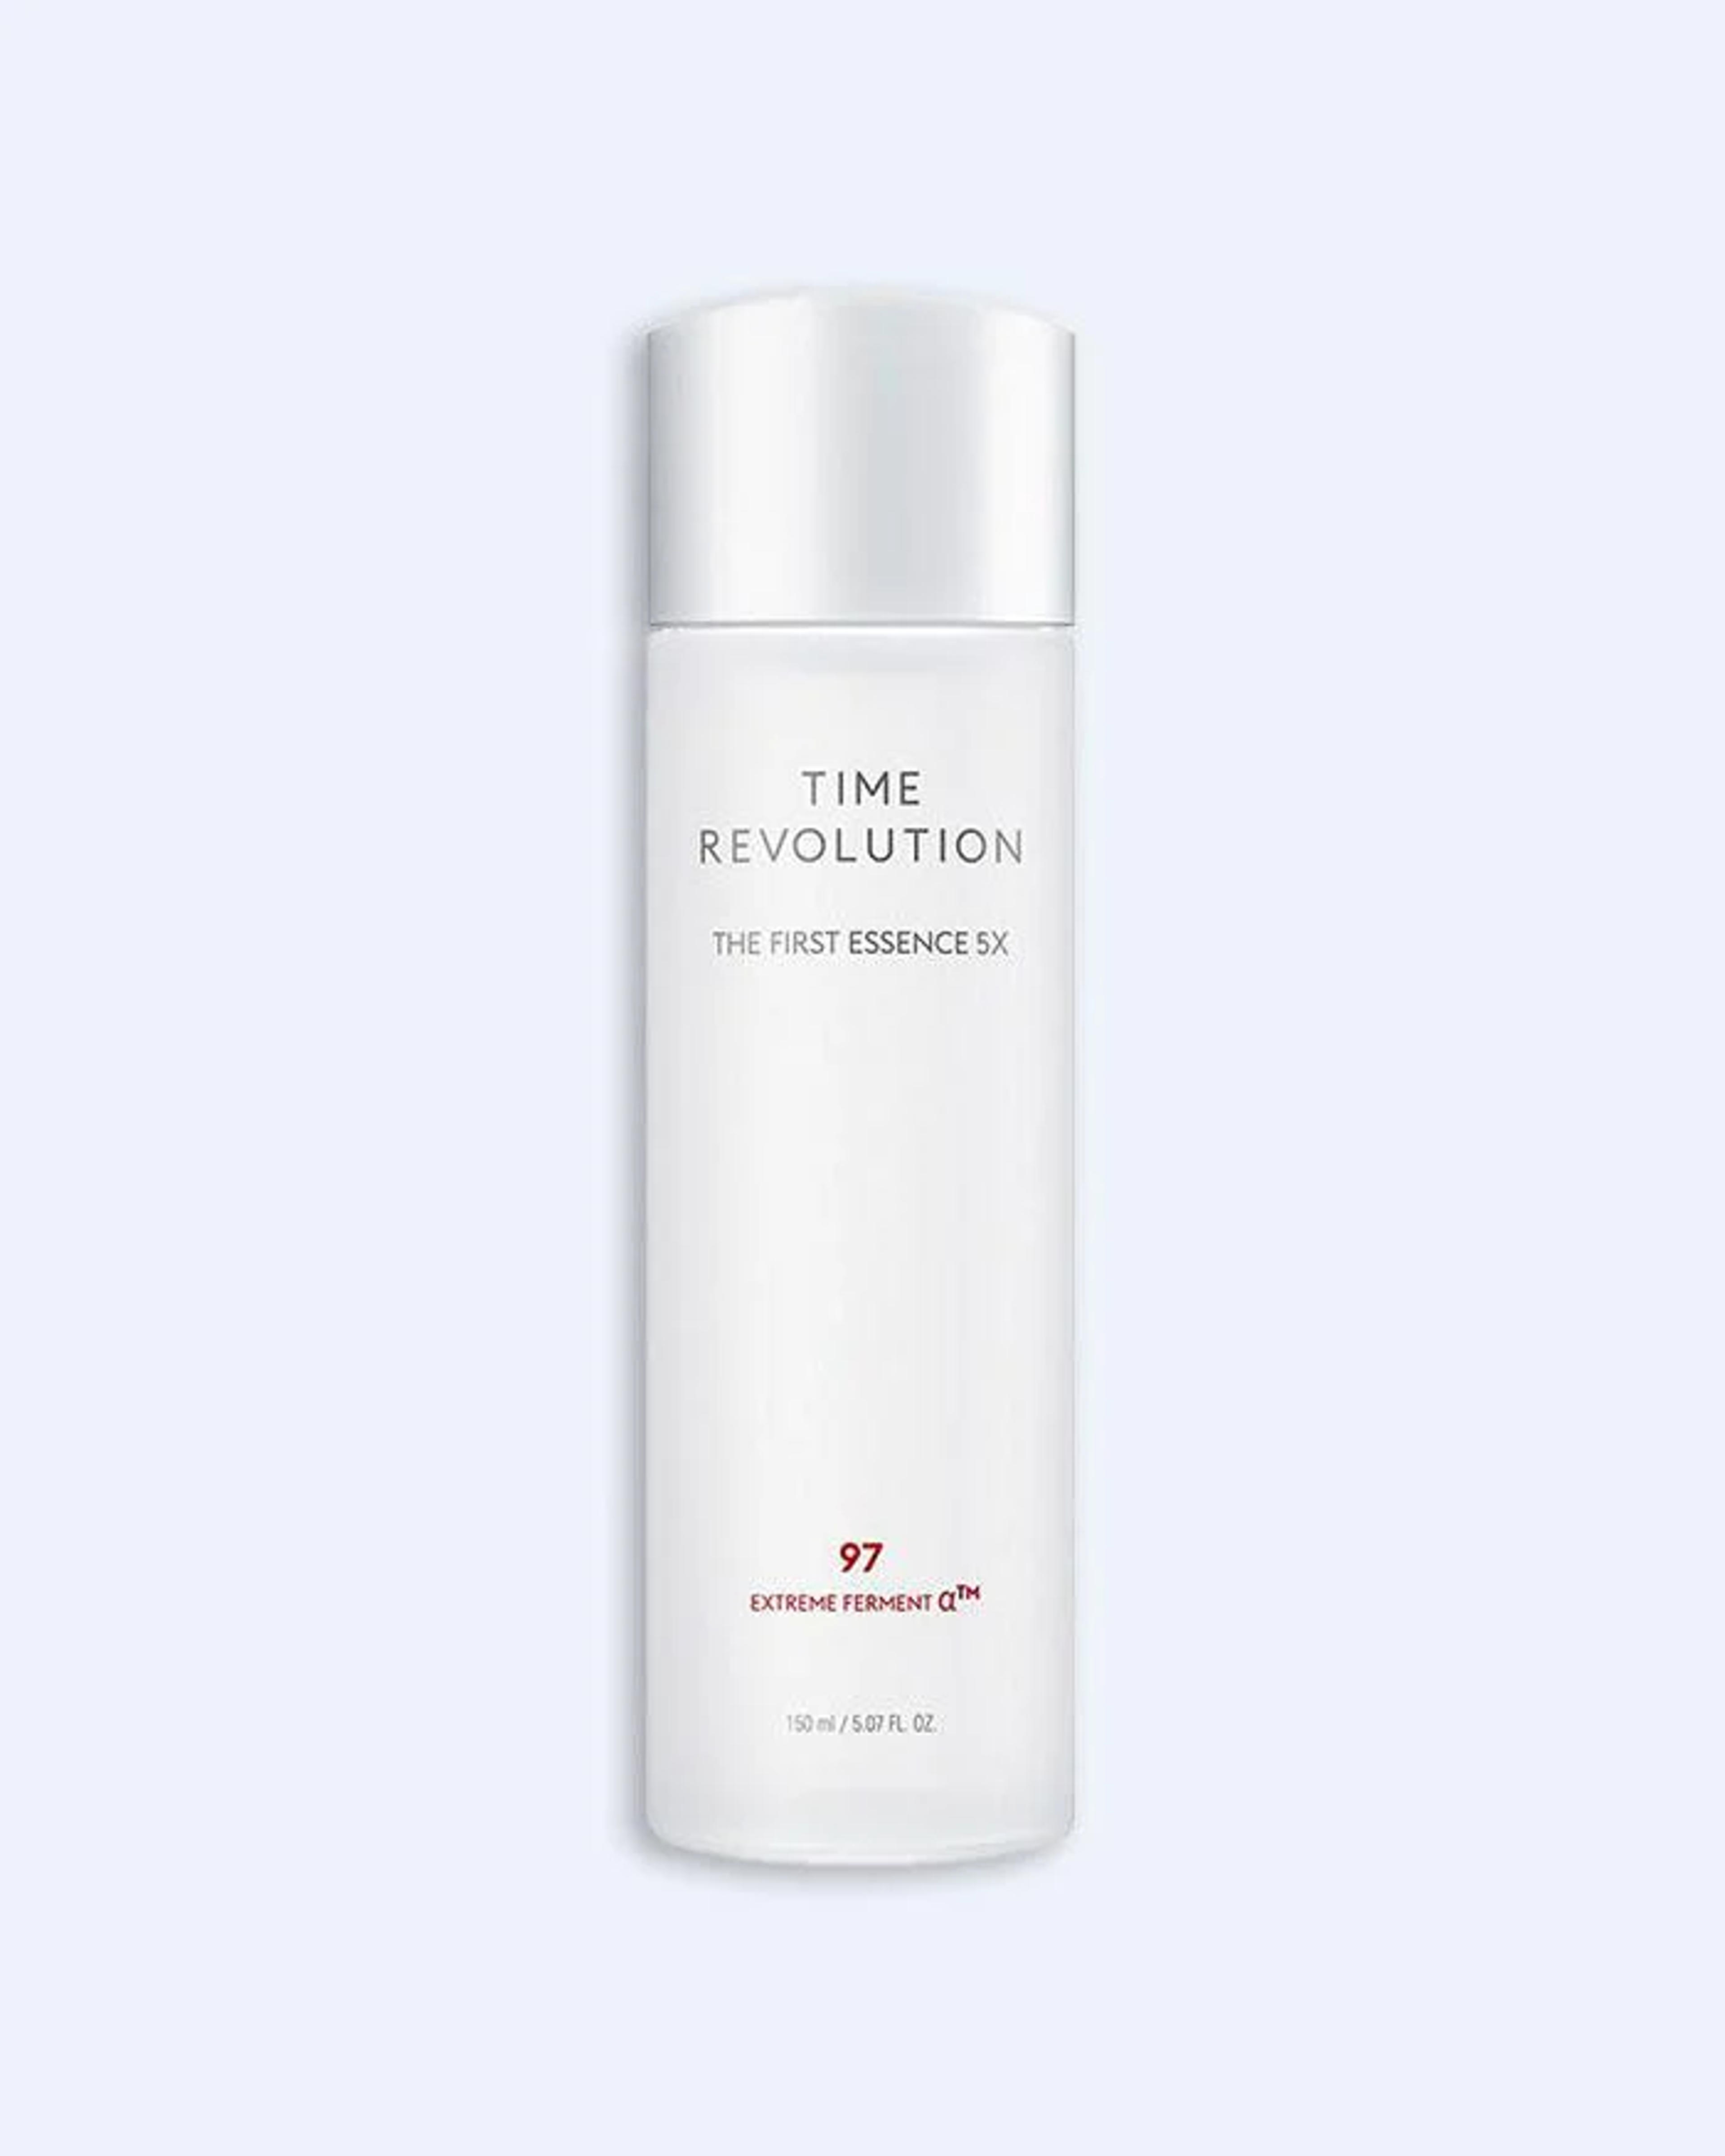 Time Revolution The First Essence 5x